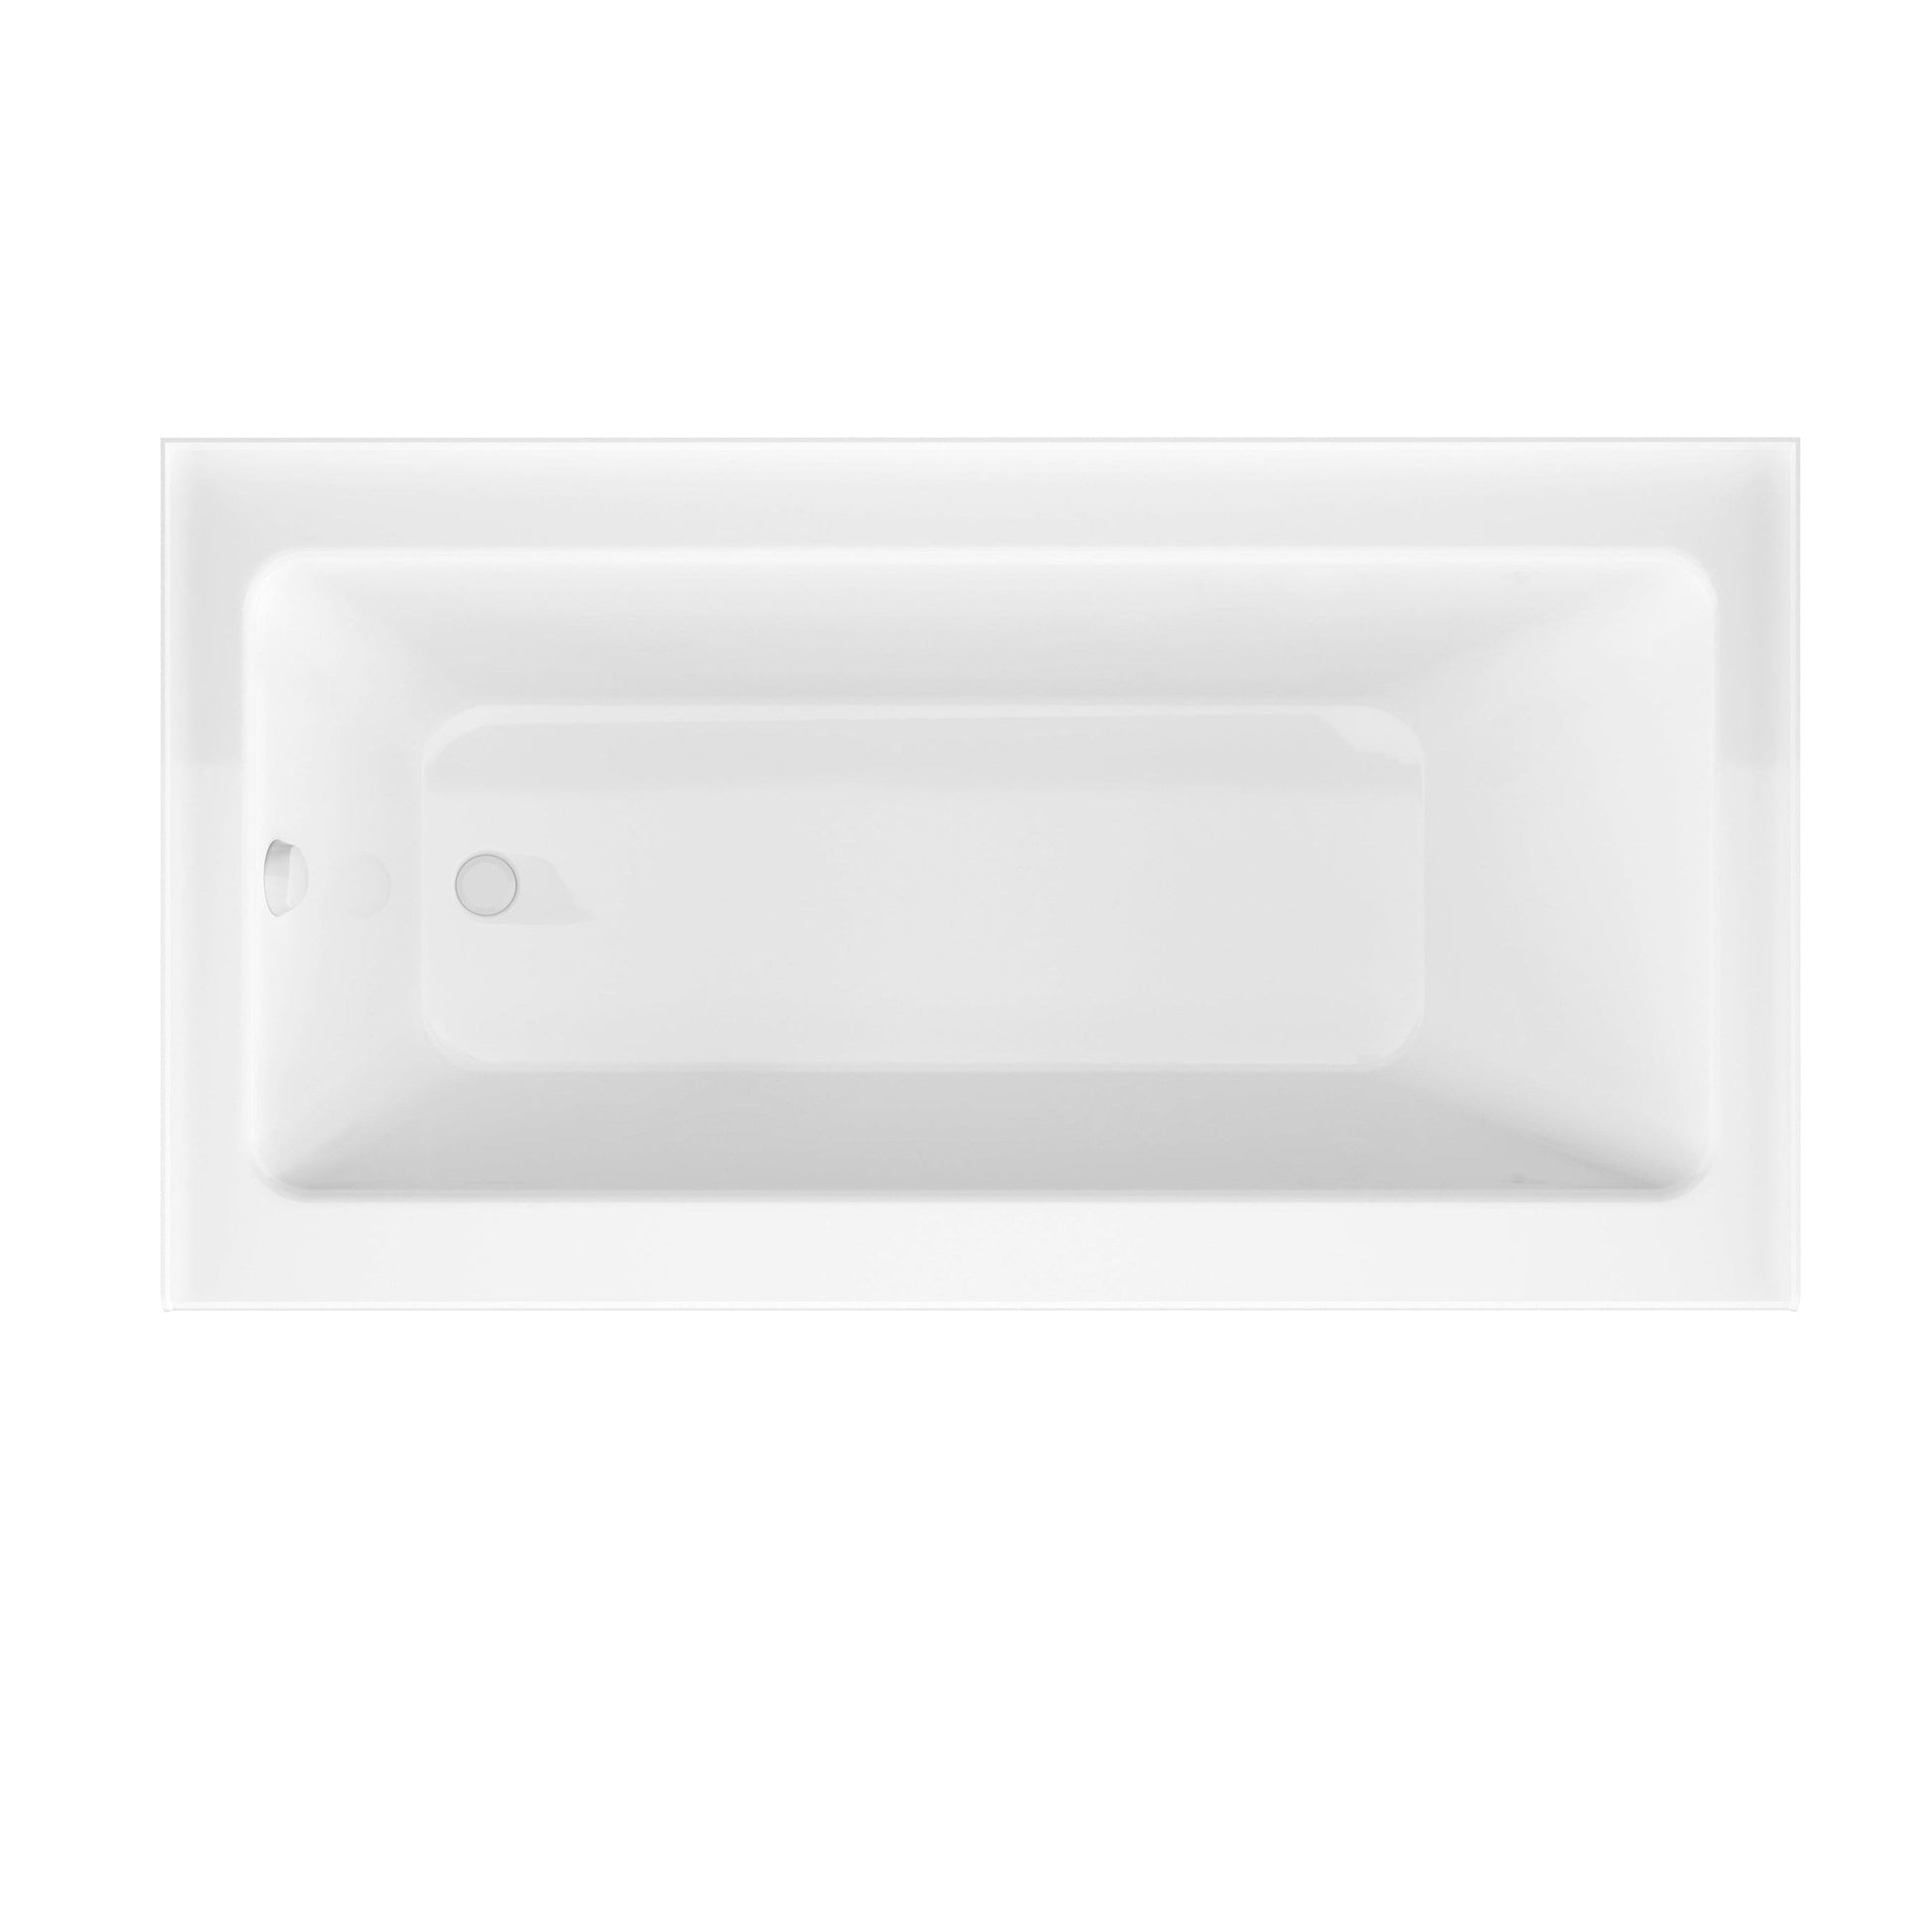 ANZZI Myth Series White "60 x 30" Alcove Left Drain Rectangular Bathtub With Built-In Flange and Frameless Polished Chrome Hinged Door